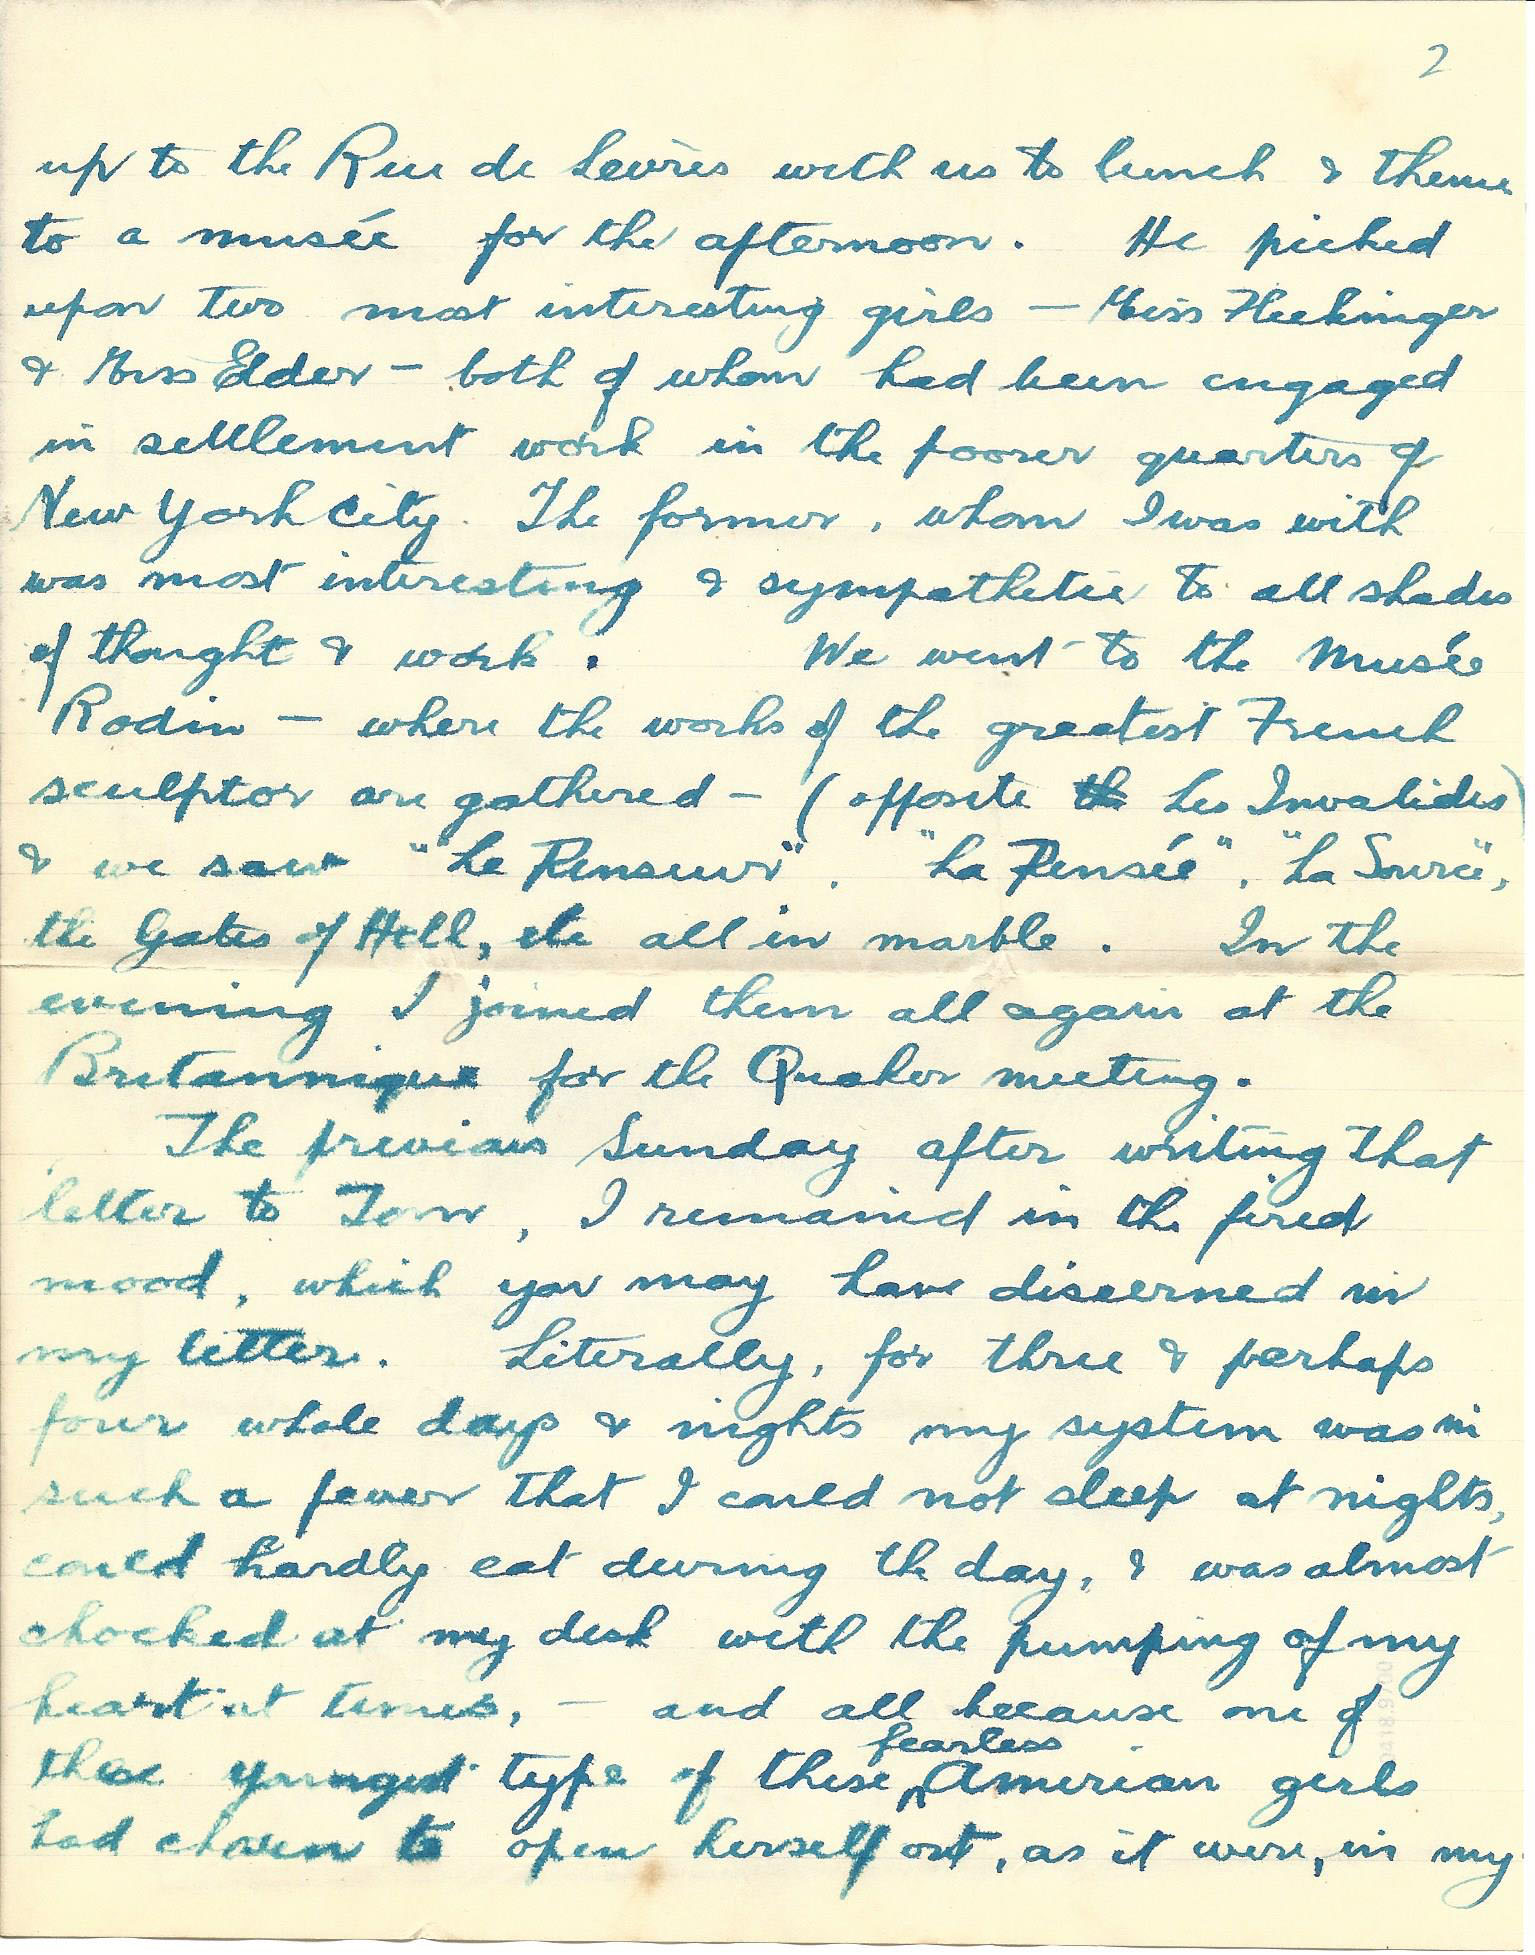 1919-09-08 p2 Donald Bearman letter to his mother